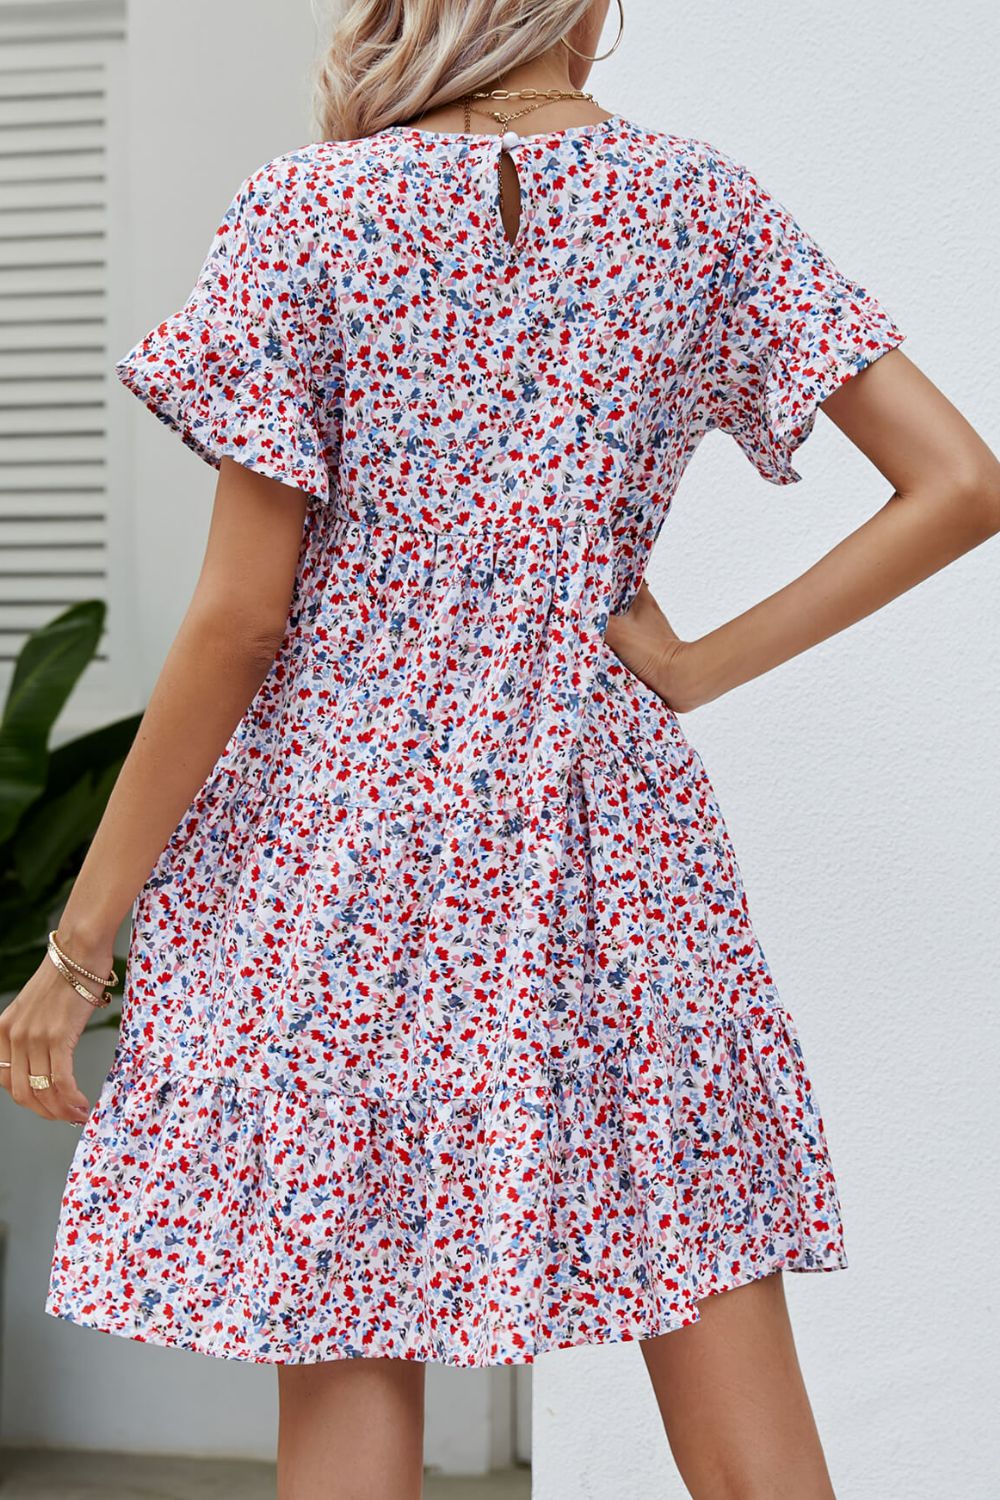 Chic Ditsy Floral Flounce Sleeve Dress: Perfect for Summer Beach Weddings & Women's Party Wear